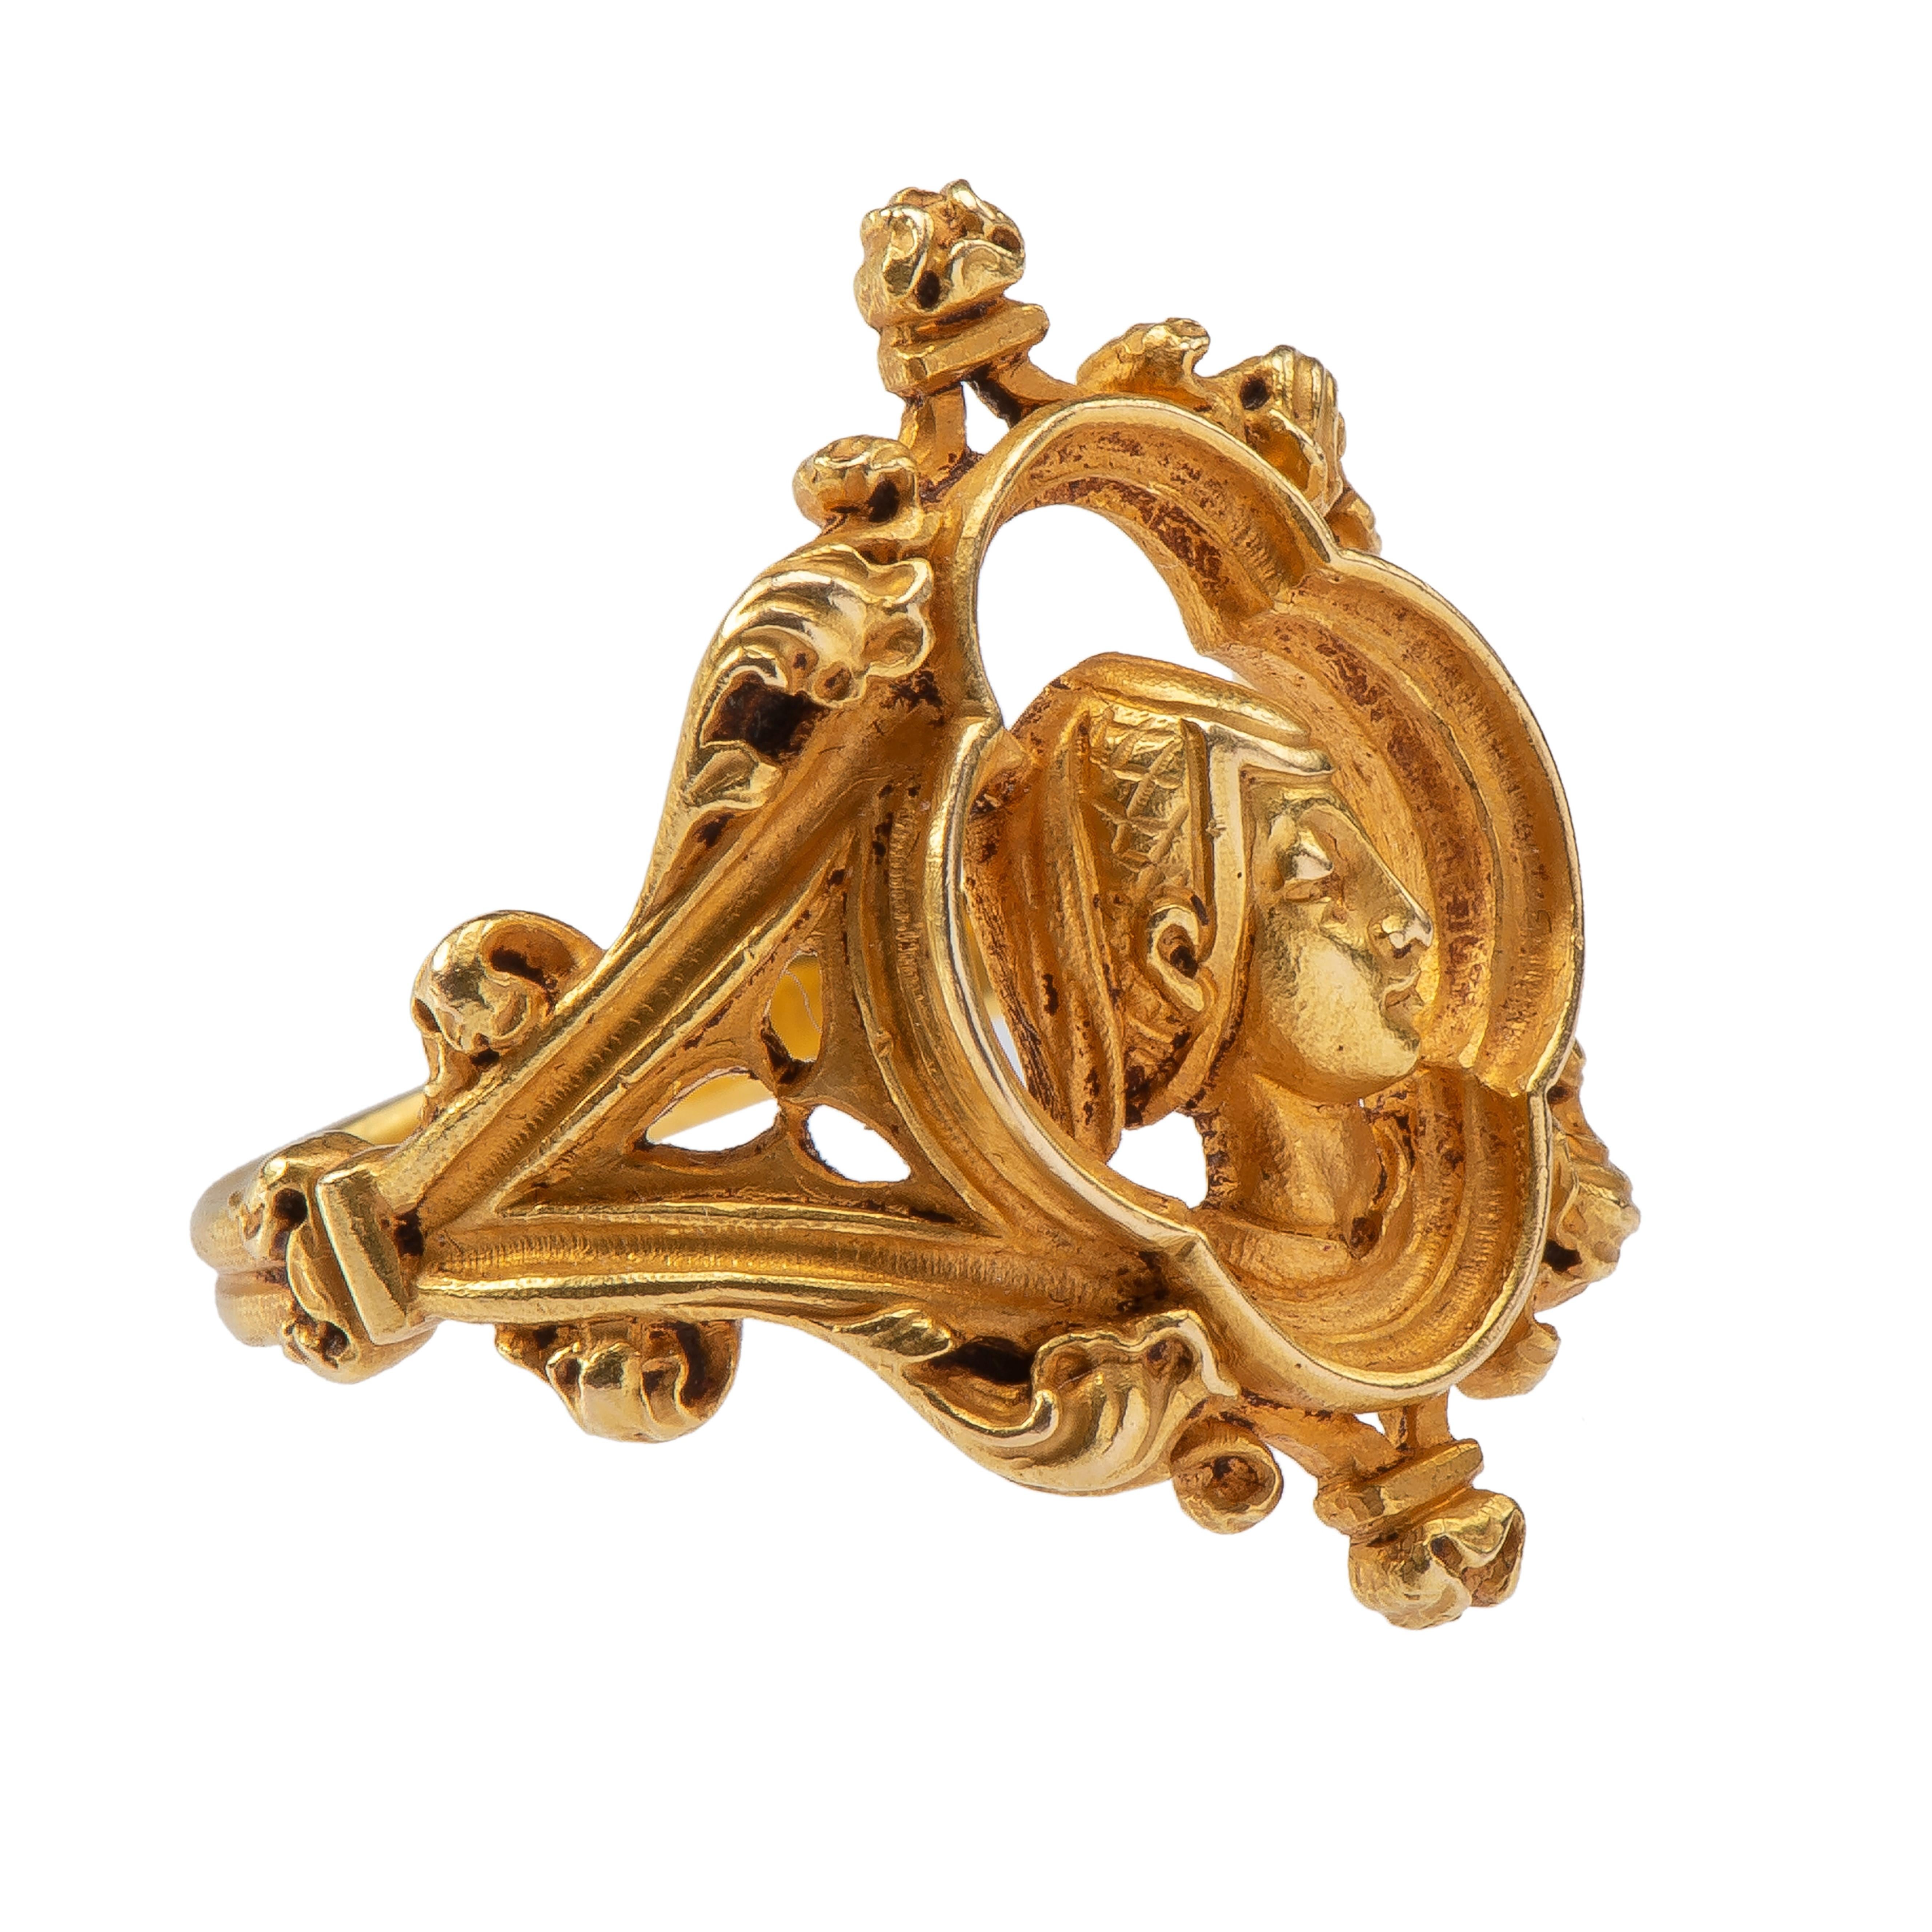 Joan of Arc Ring by Louis Wièse (1852-1930)
France, c. 1890
Gold
Weight 9.3 gr.; Circumference 56.45 mm.; US size 7 3/4; UK size P ½

Cast and chased openwork gold ring with square section hoop, grooved on the lower half and forked at the shoulder